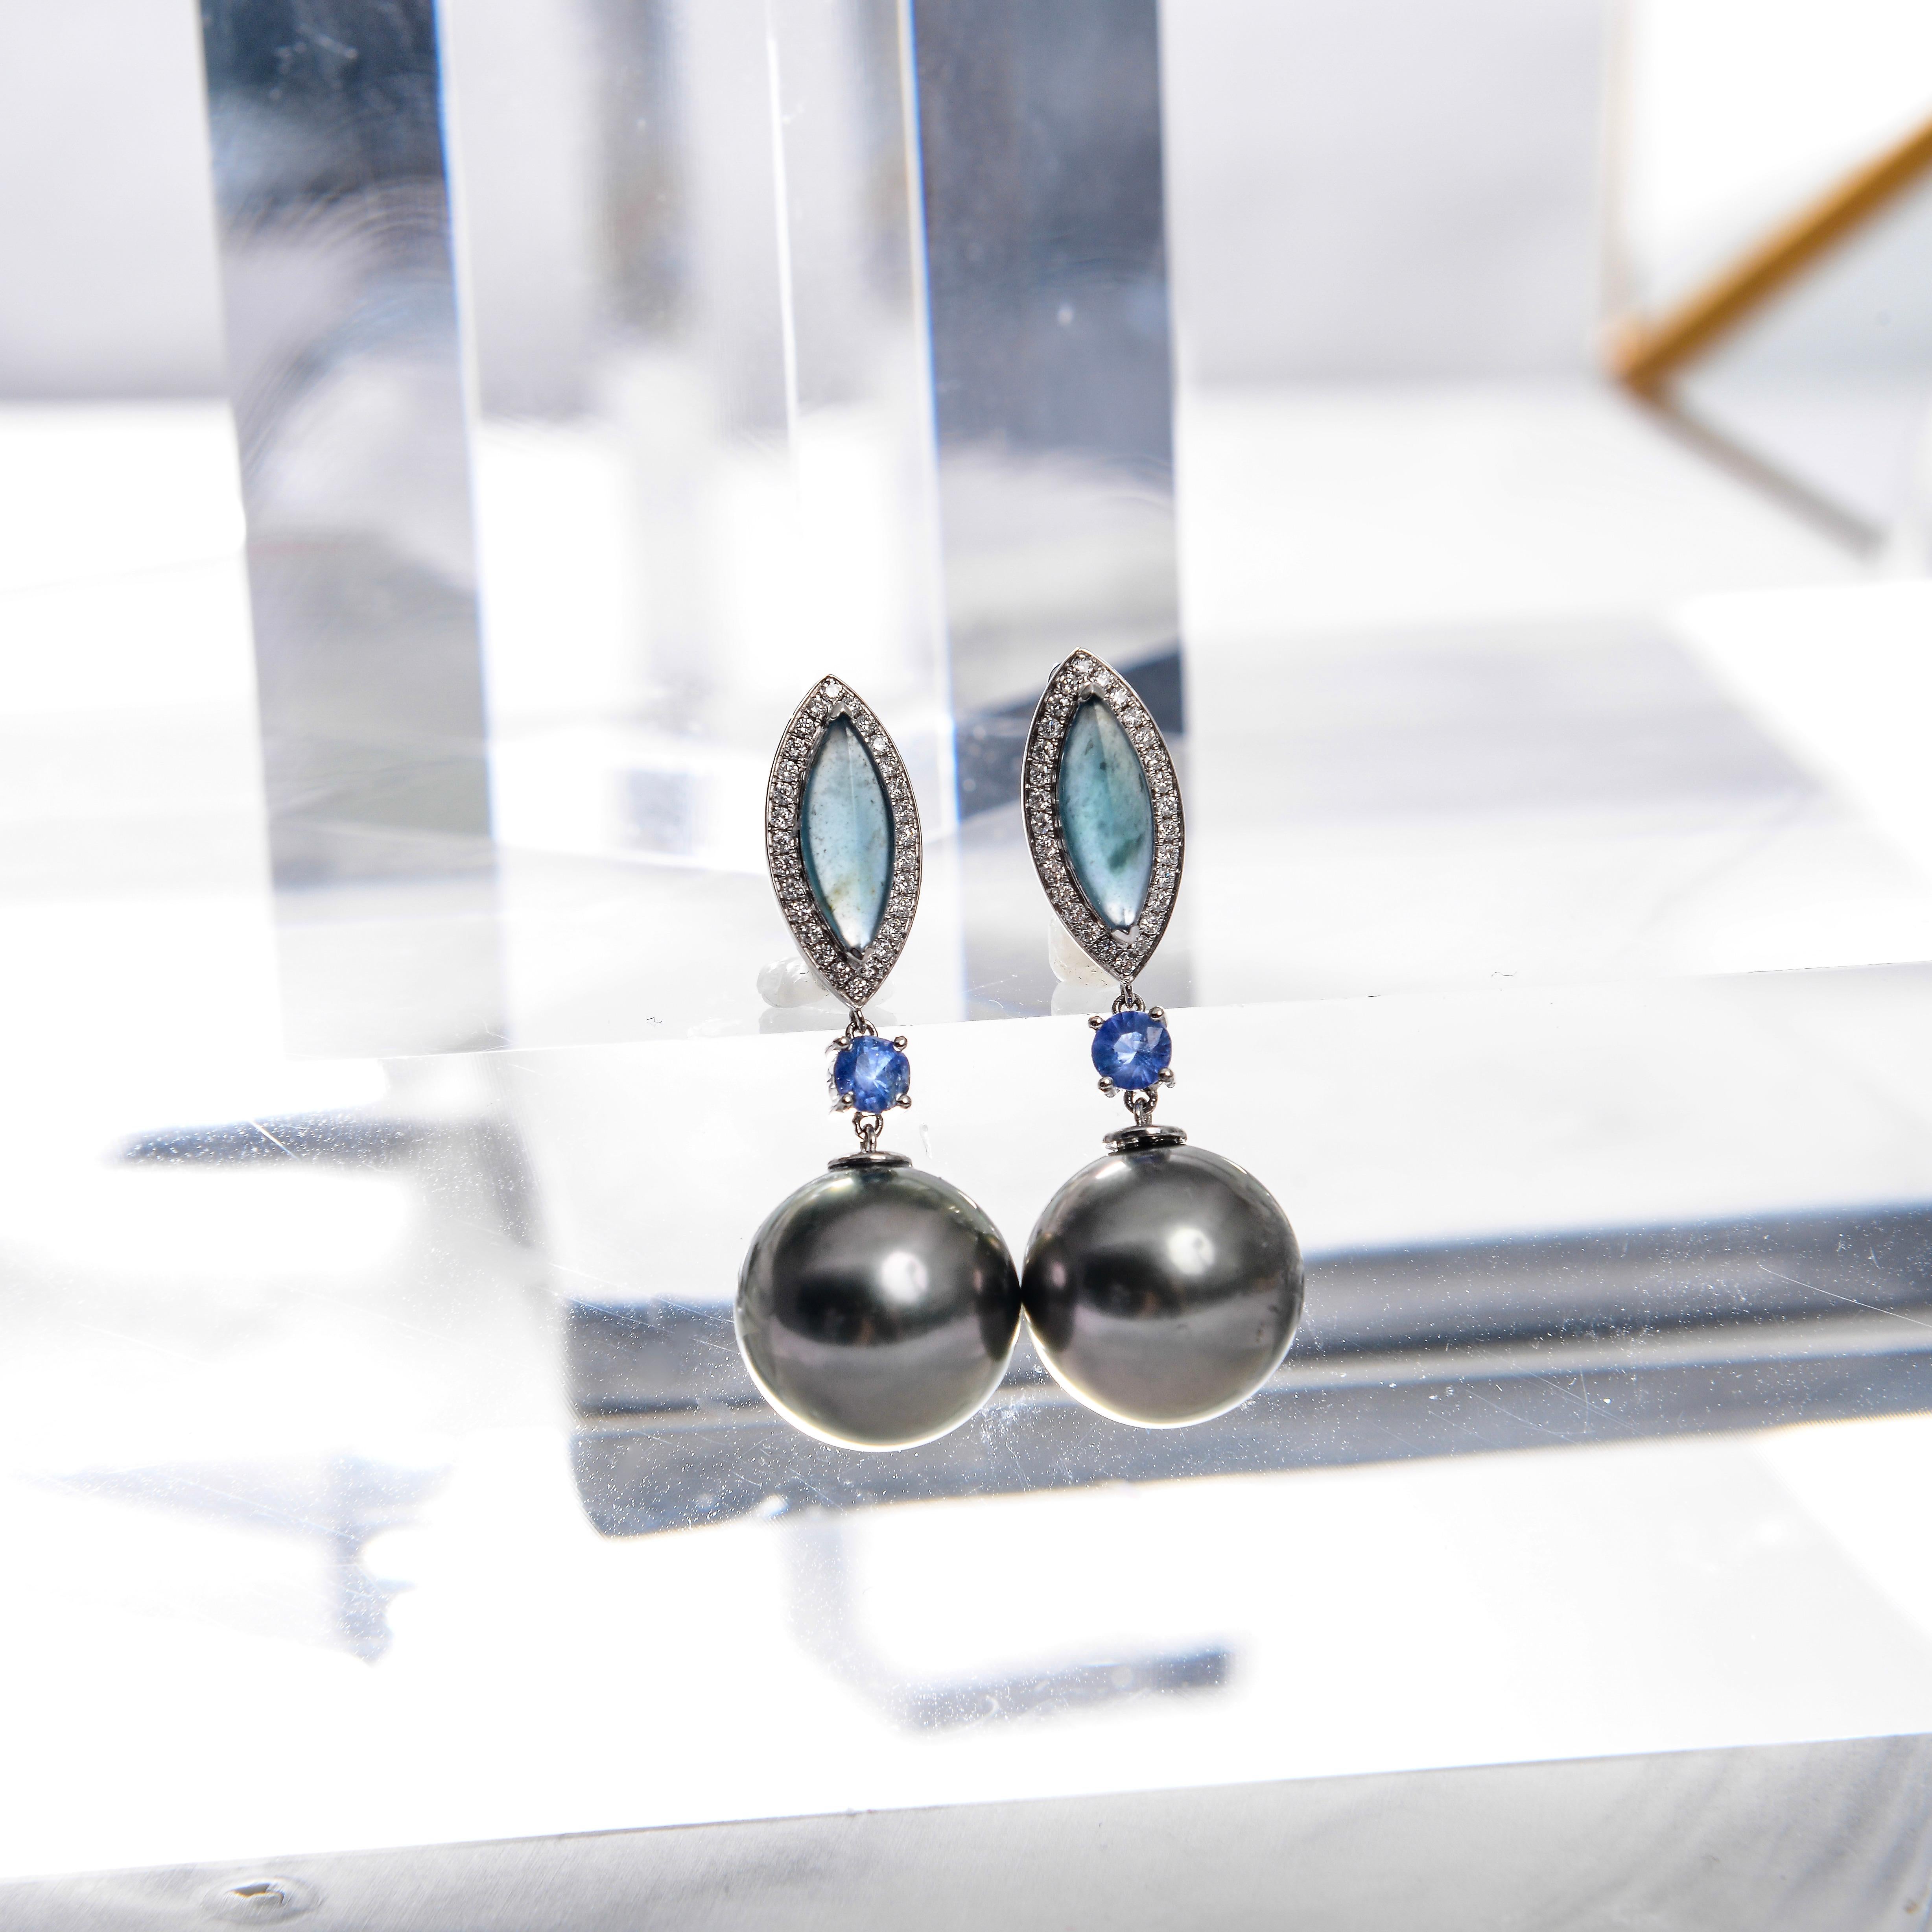 A pair of Tahitian Pearl, Type A Natural Jadeite Jade, Blue Sapphire and Diamond Earring in 18k White Gold
A Tahitian Pearl, Type A Natural Jadeite Jade, Blue Sapphire and Diamond Pendant in 18k White Gold

It consists of 3 matching Black Colour